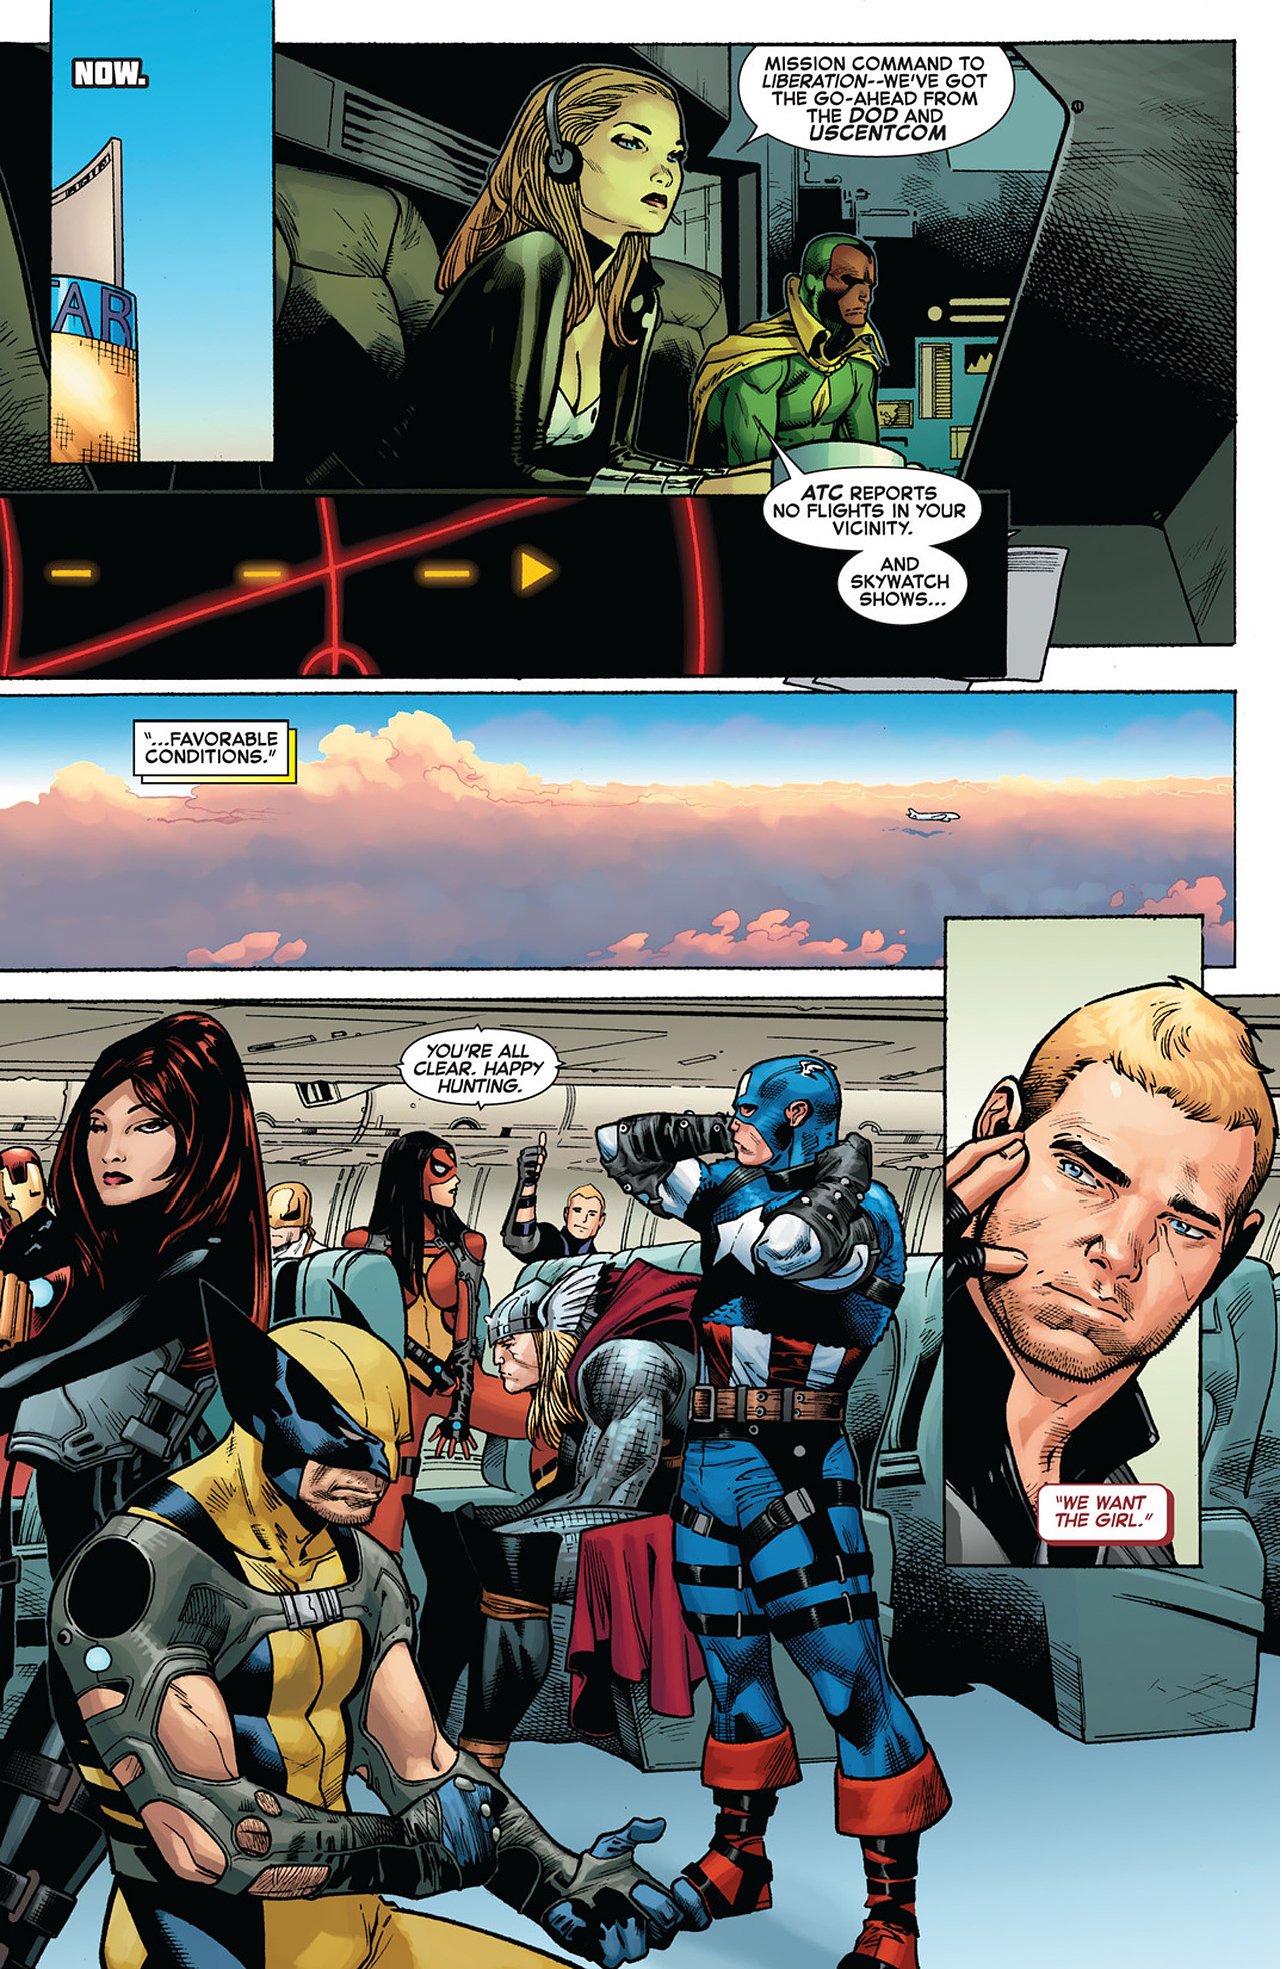 the avengers tries to abduct hope summers